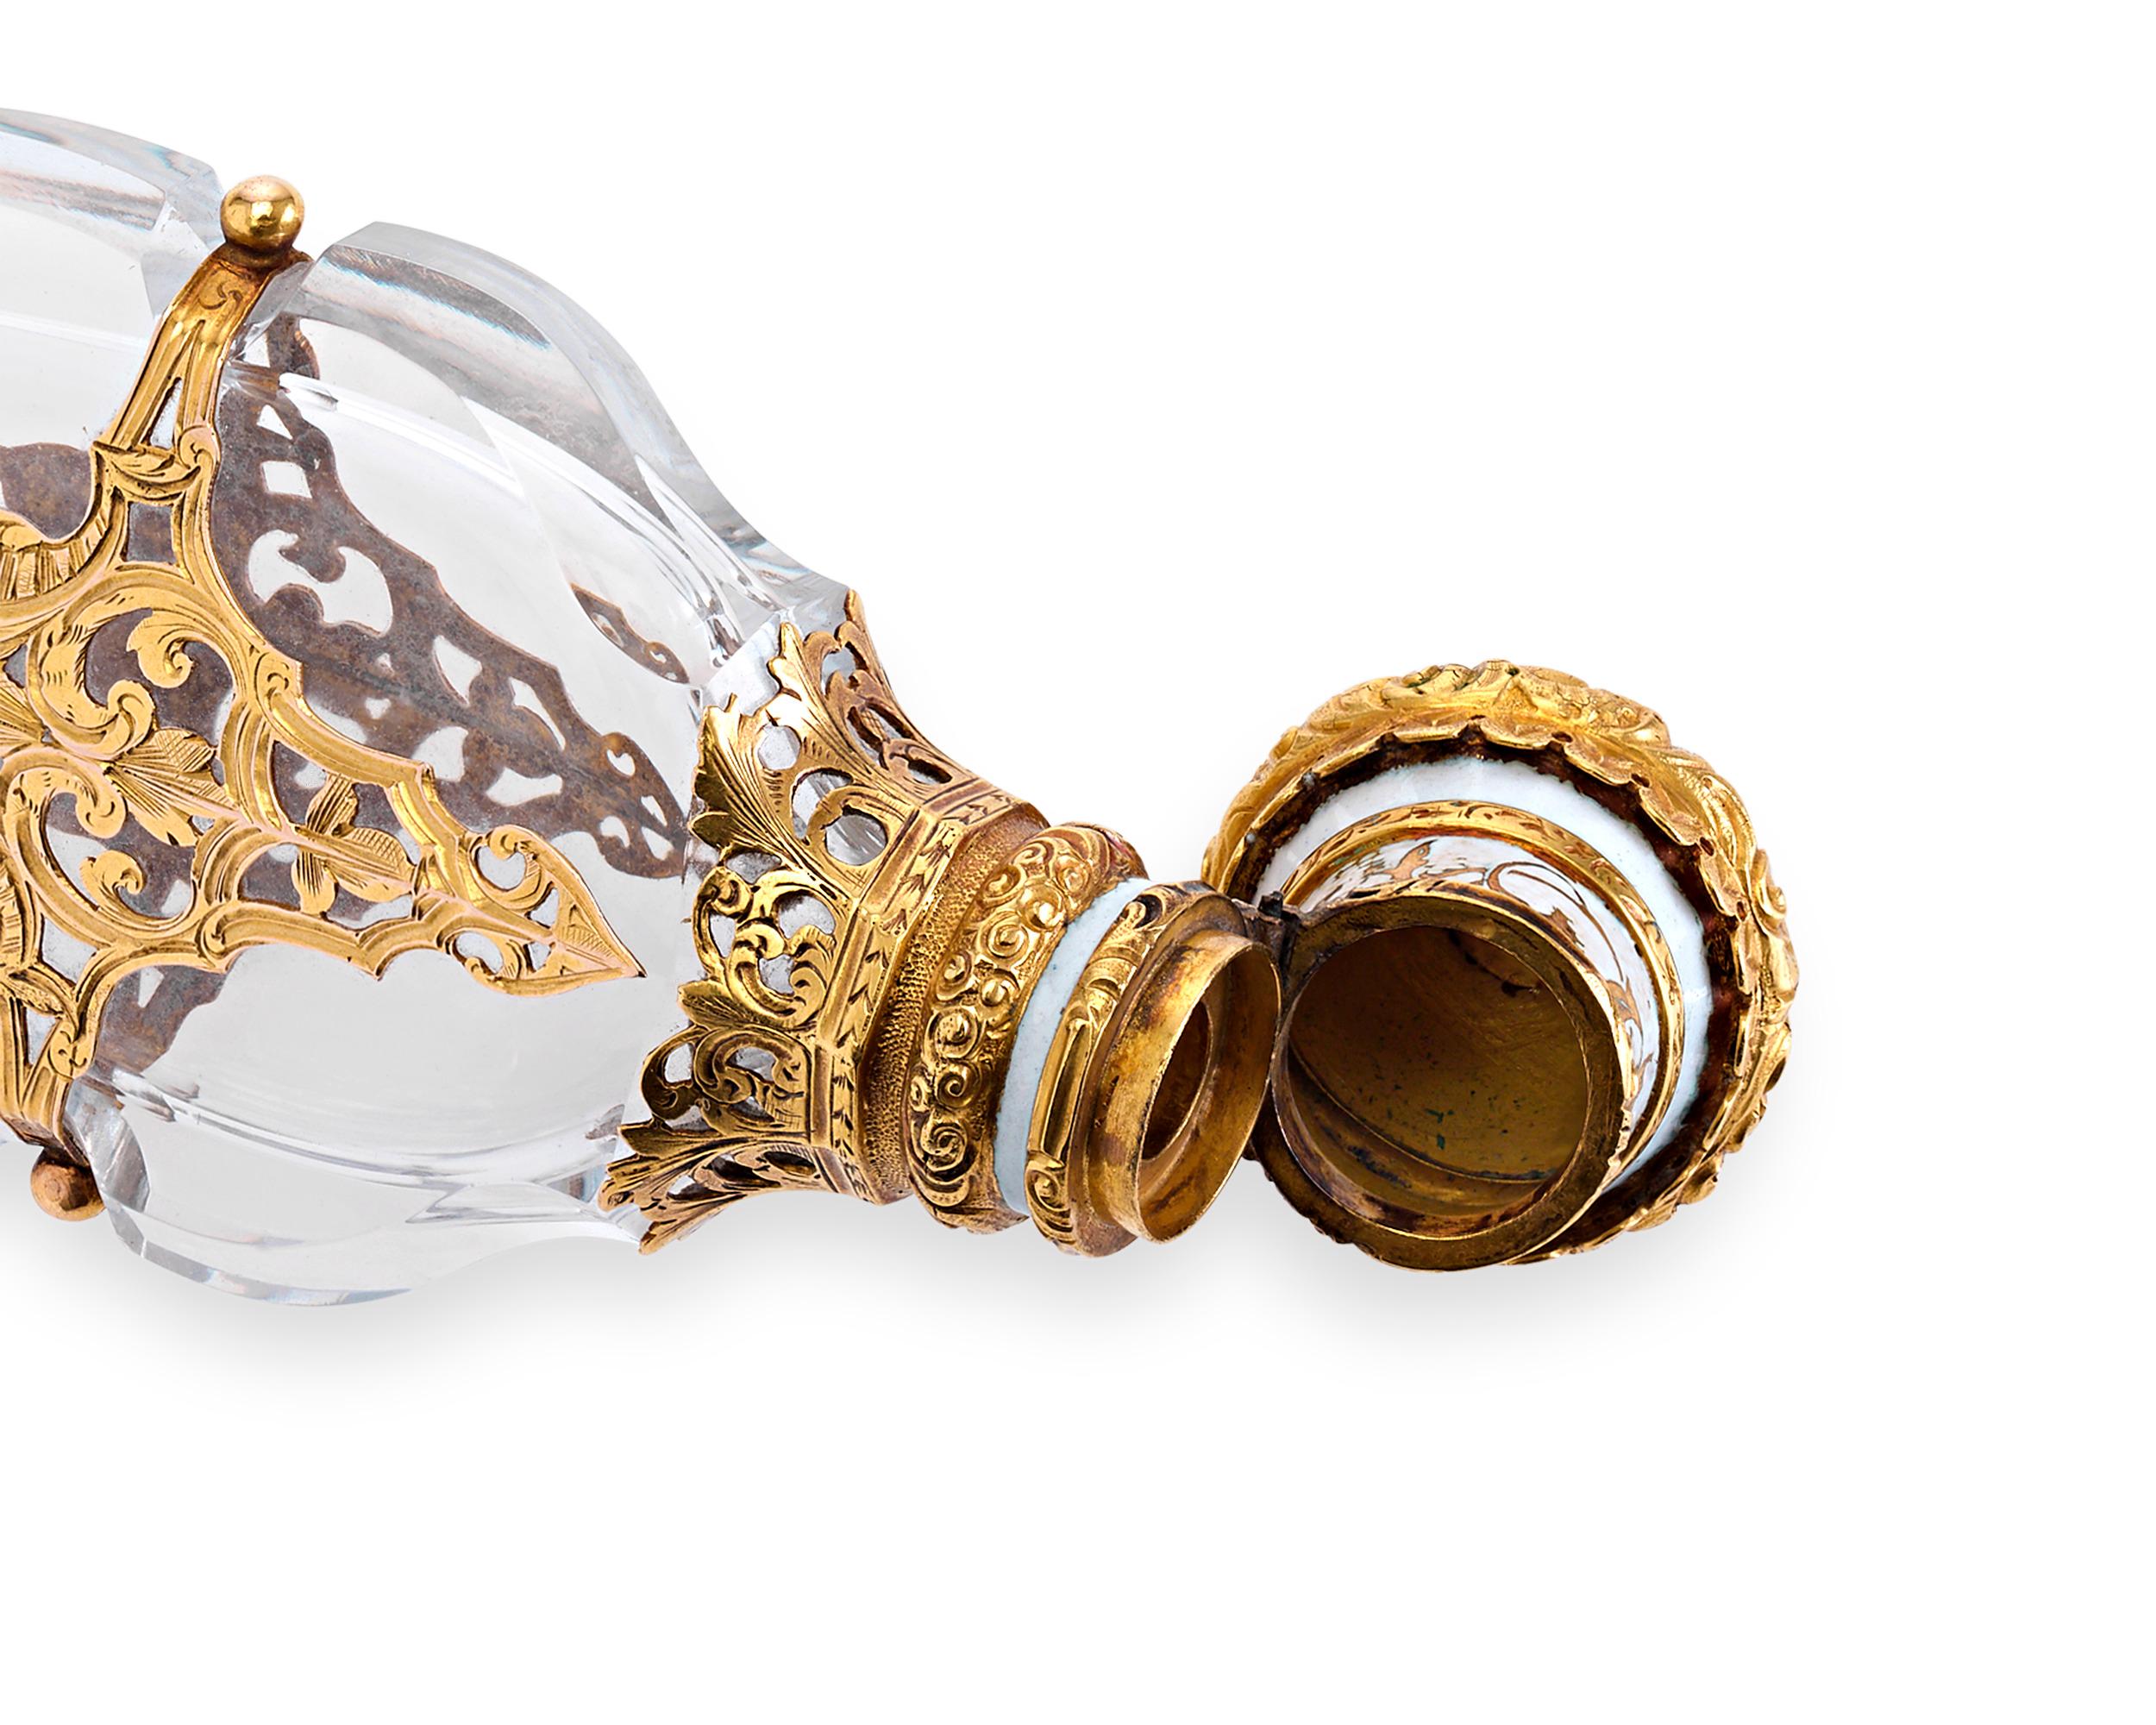 Remarkable artistry and craftsmanship distinguish this enchanting perfume. Displaying a glorious figural shape, this stunning glass vial is wrapped within a frame of yellow gold. The design of this rare piece exhibits an exuberant Napoleon III